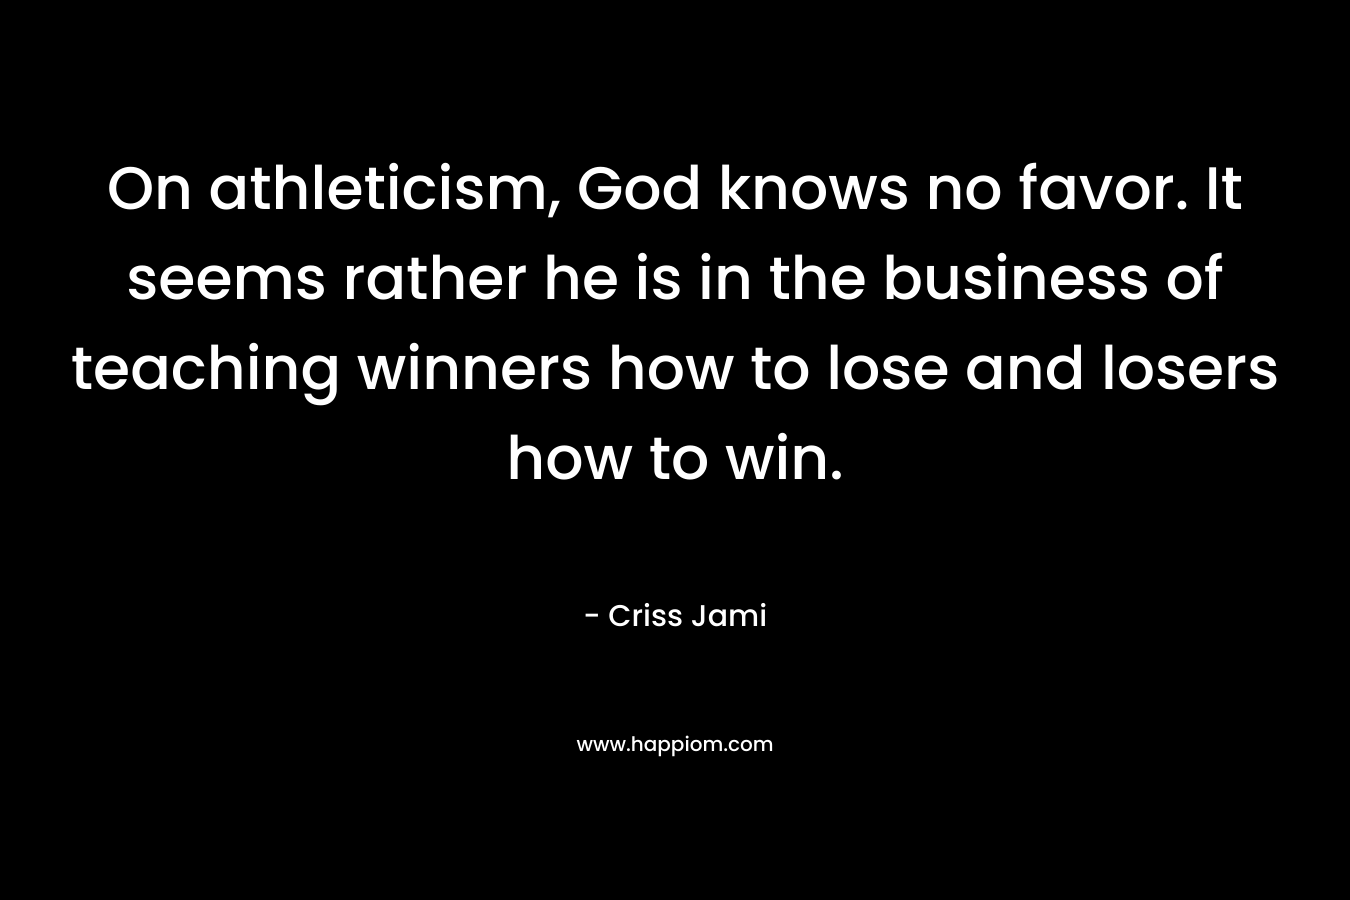 On athleticism, God knows no favor. It seems rather he is in the business of teaching winners how to lose and losers how to win.